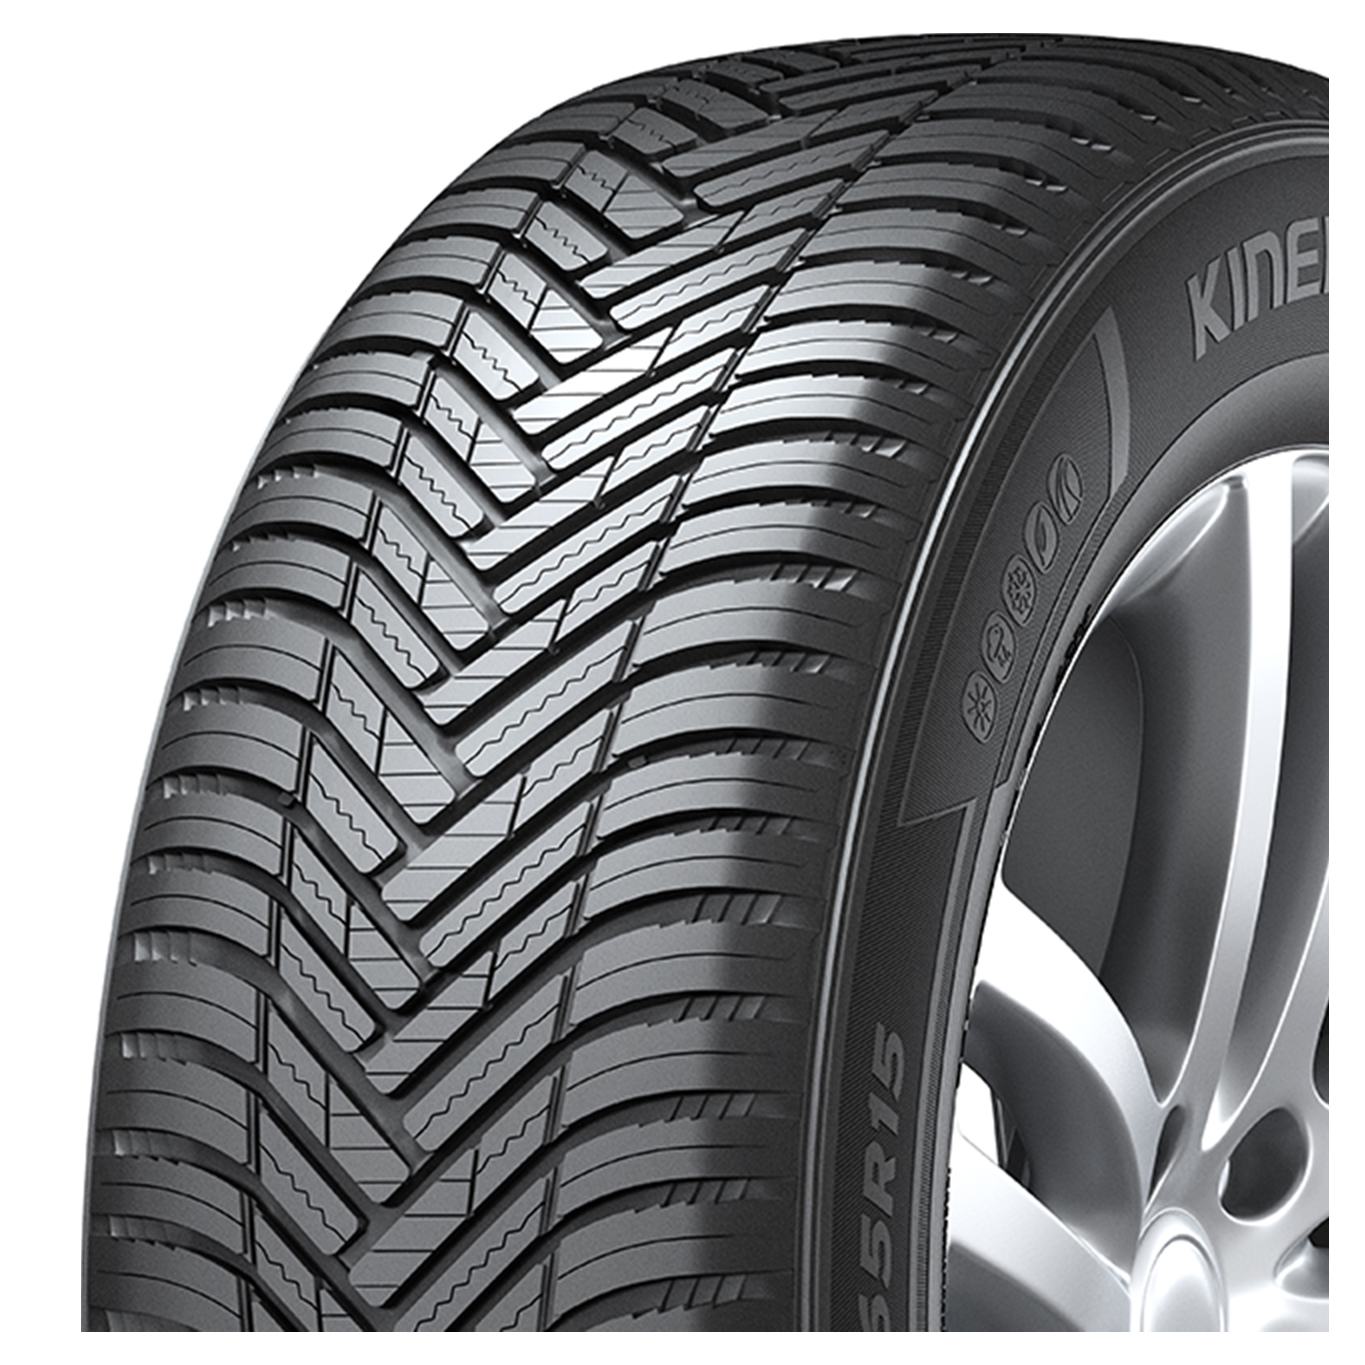 175/65 R14 82T KInERGy 4S 2 H750 M+S